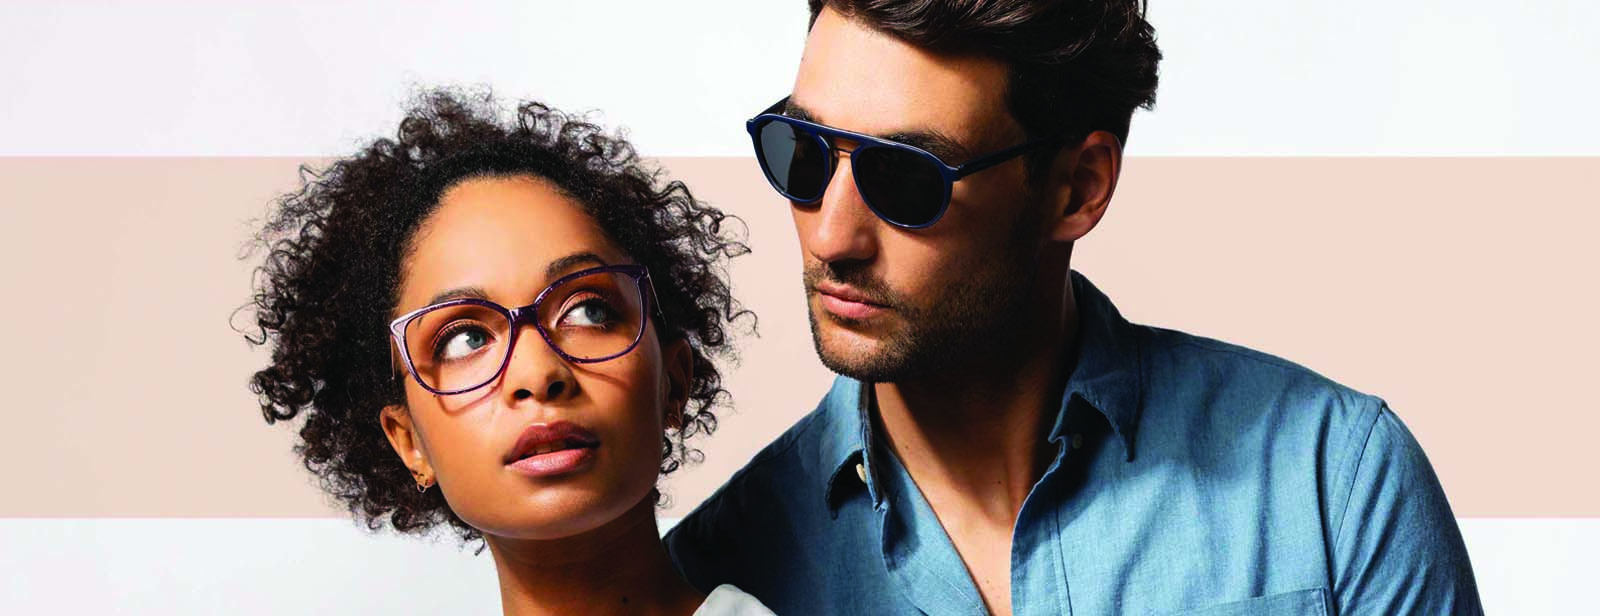 An easy step-by-step guide to getting the perfect-fitting glasses